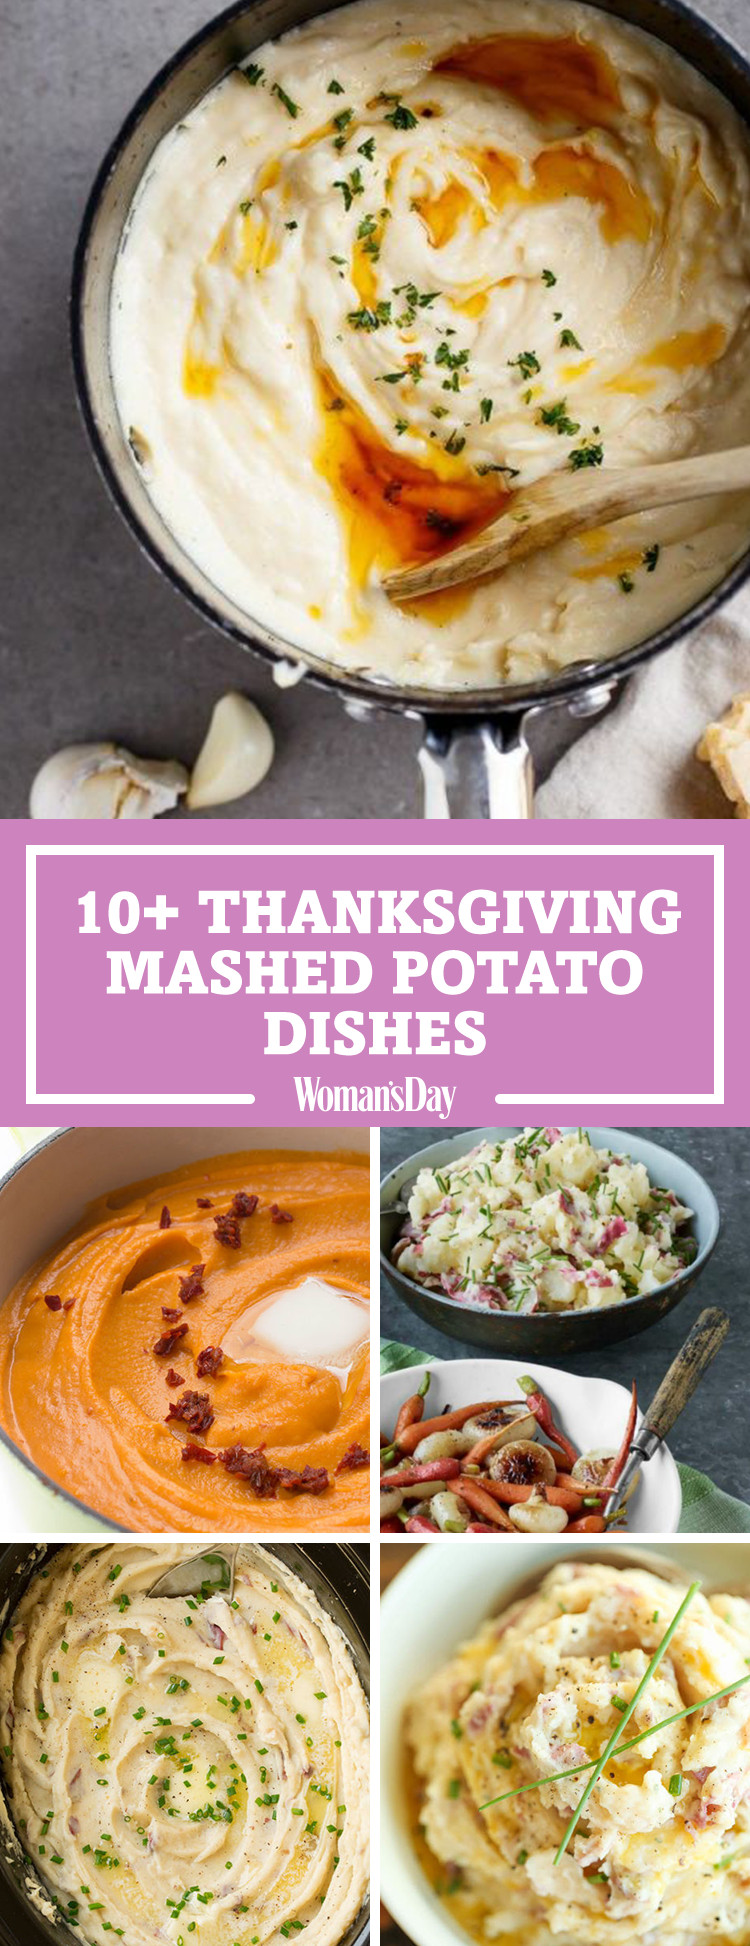 Best Mashed Potatoes For Thanksgiving
 14 Best Mashed Potato Recipes How to Make Mashed